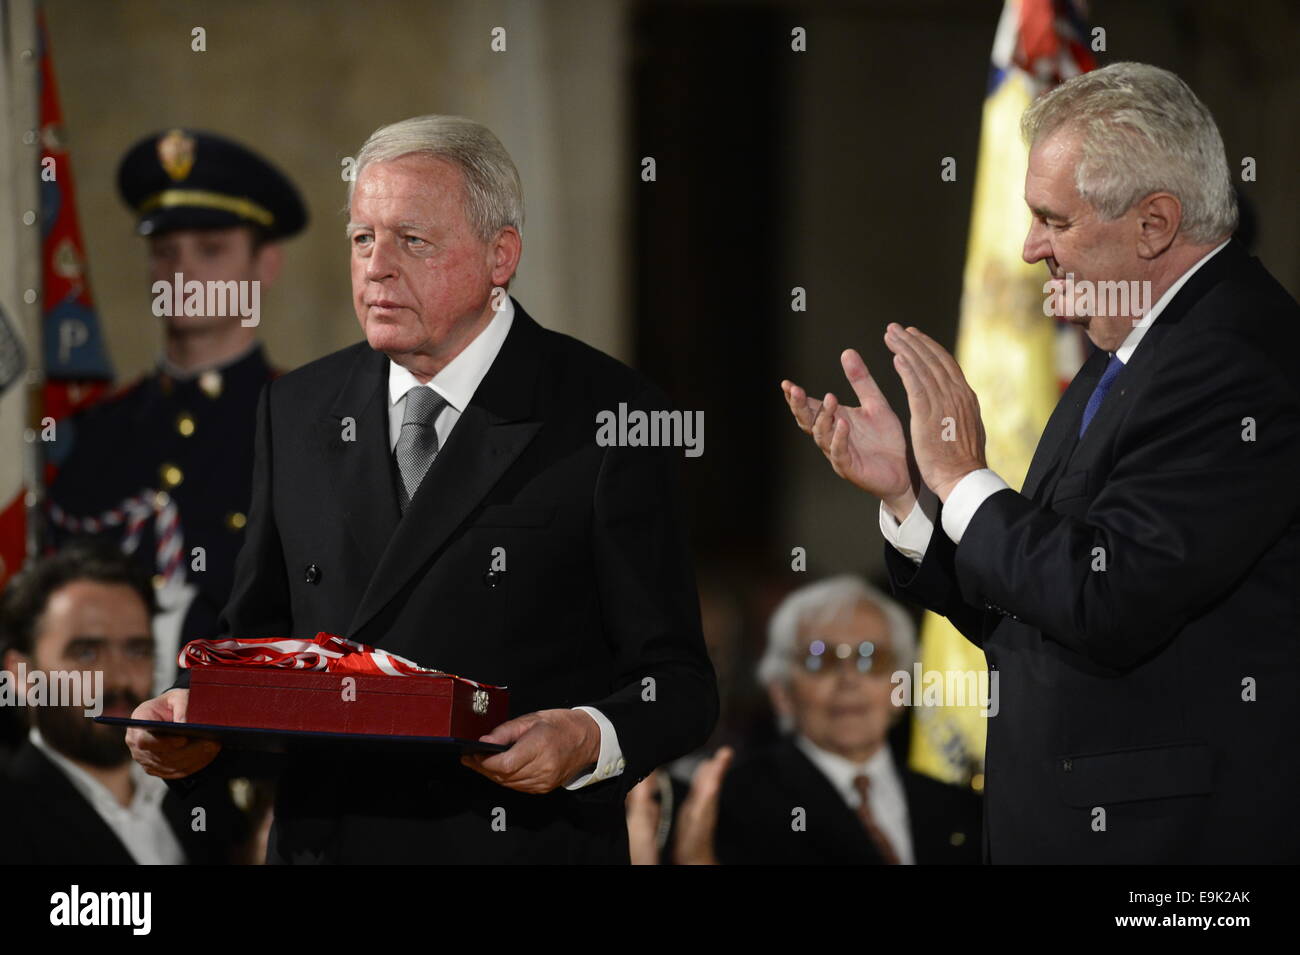 Prague, Czech Republic. 28th Oct, 2014. Czech President Milos Zeman (right) bestowed the Order of the White Lion, the highest Czech state award, on former Austrian chancellor Franz Vranitzky at a ceremony at Prague Castle today, on Tuesday, October 28, 2014. Vranitzky have been decorated for his outstanding contribution for the benefit of the Czech Republic. Credit:  CTK/Alamy Live News Stock Photo